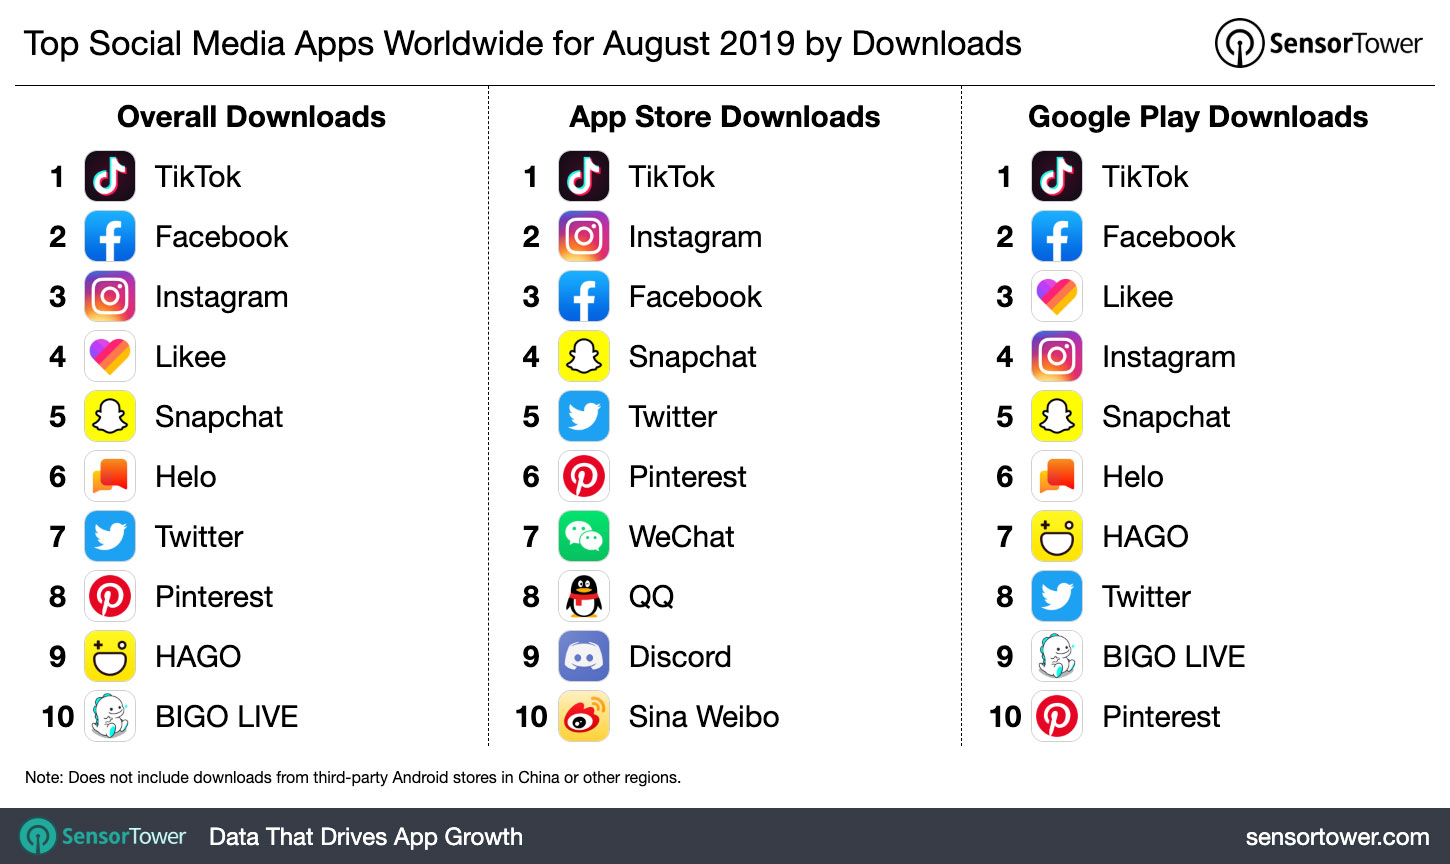 Top Social Media Apps Worldwide for August 2019 by Downloads